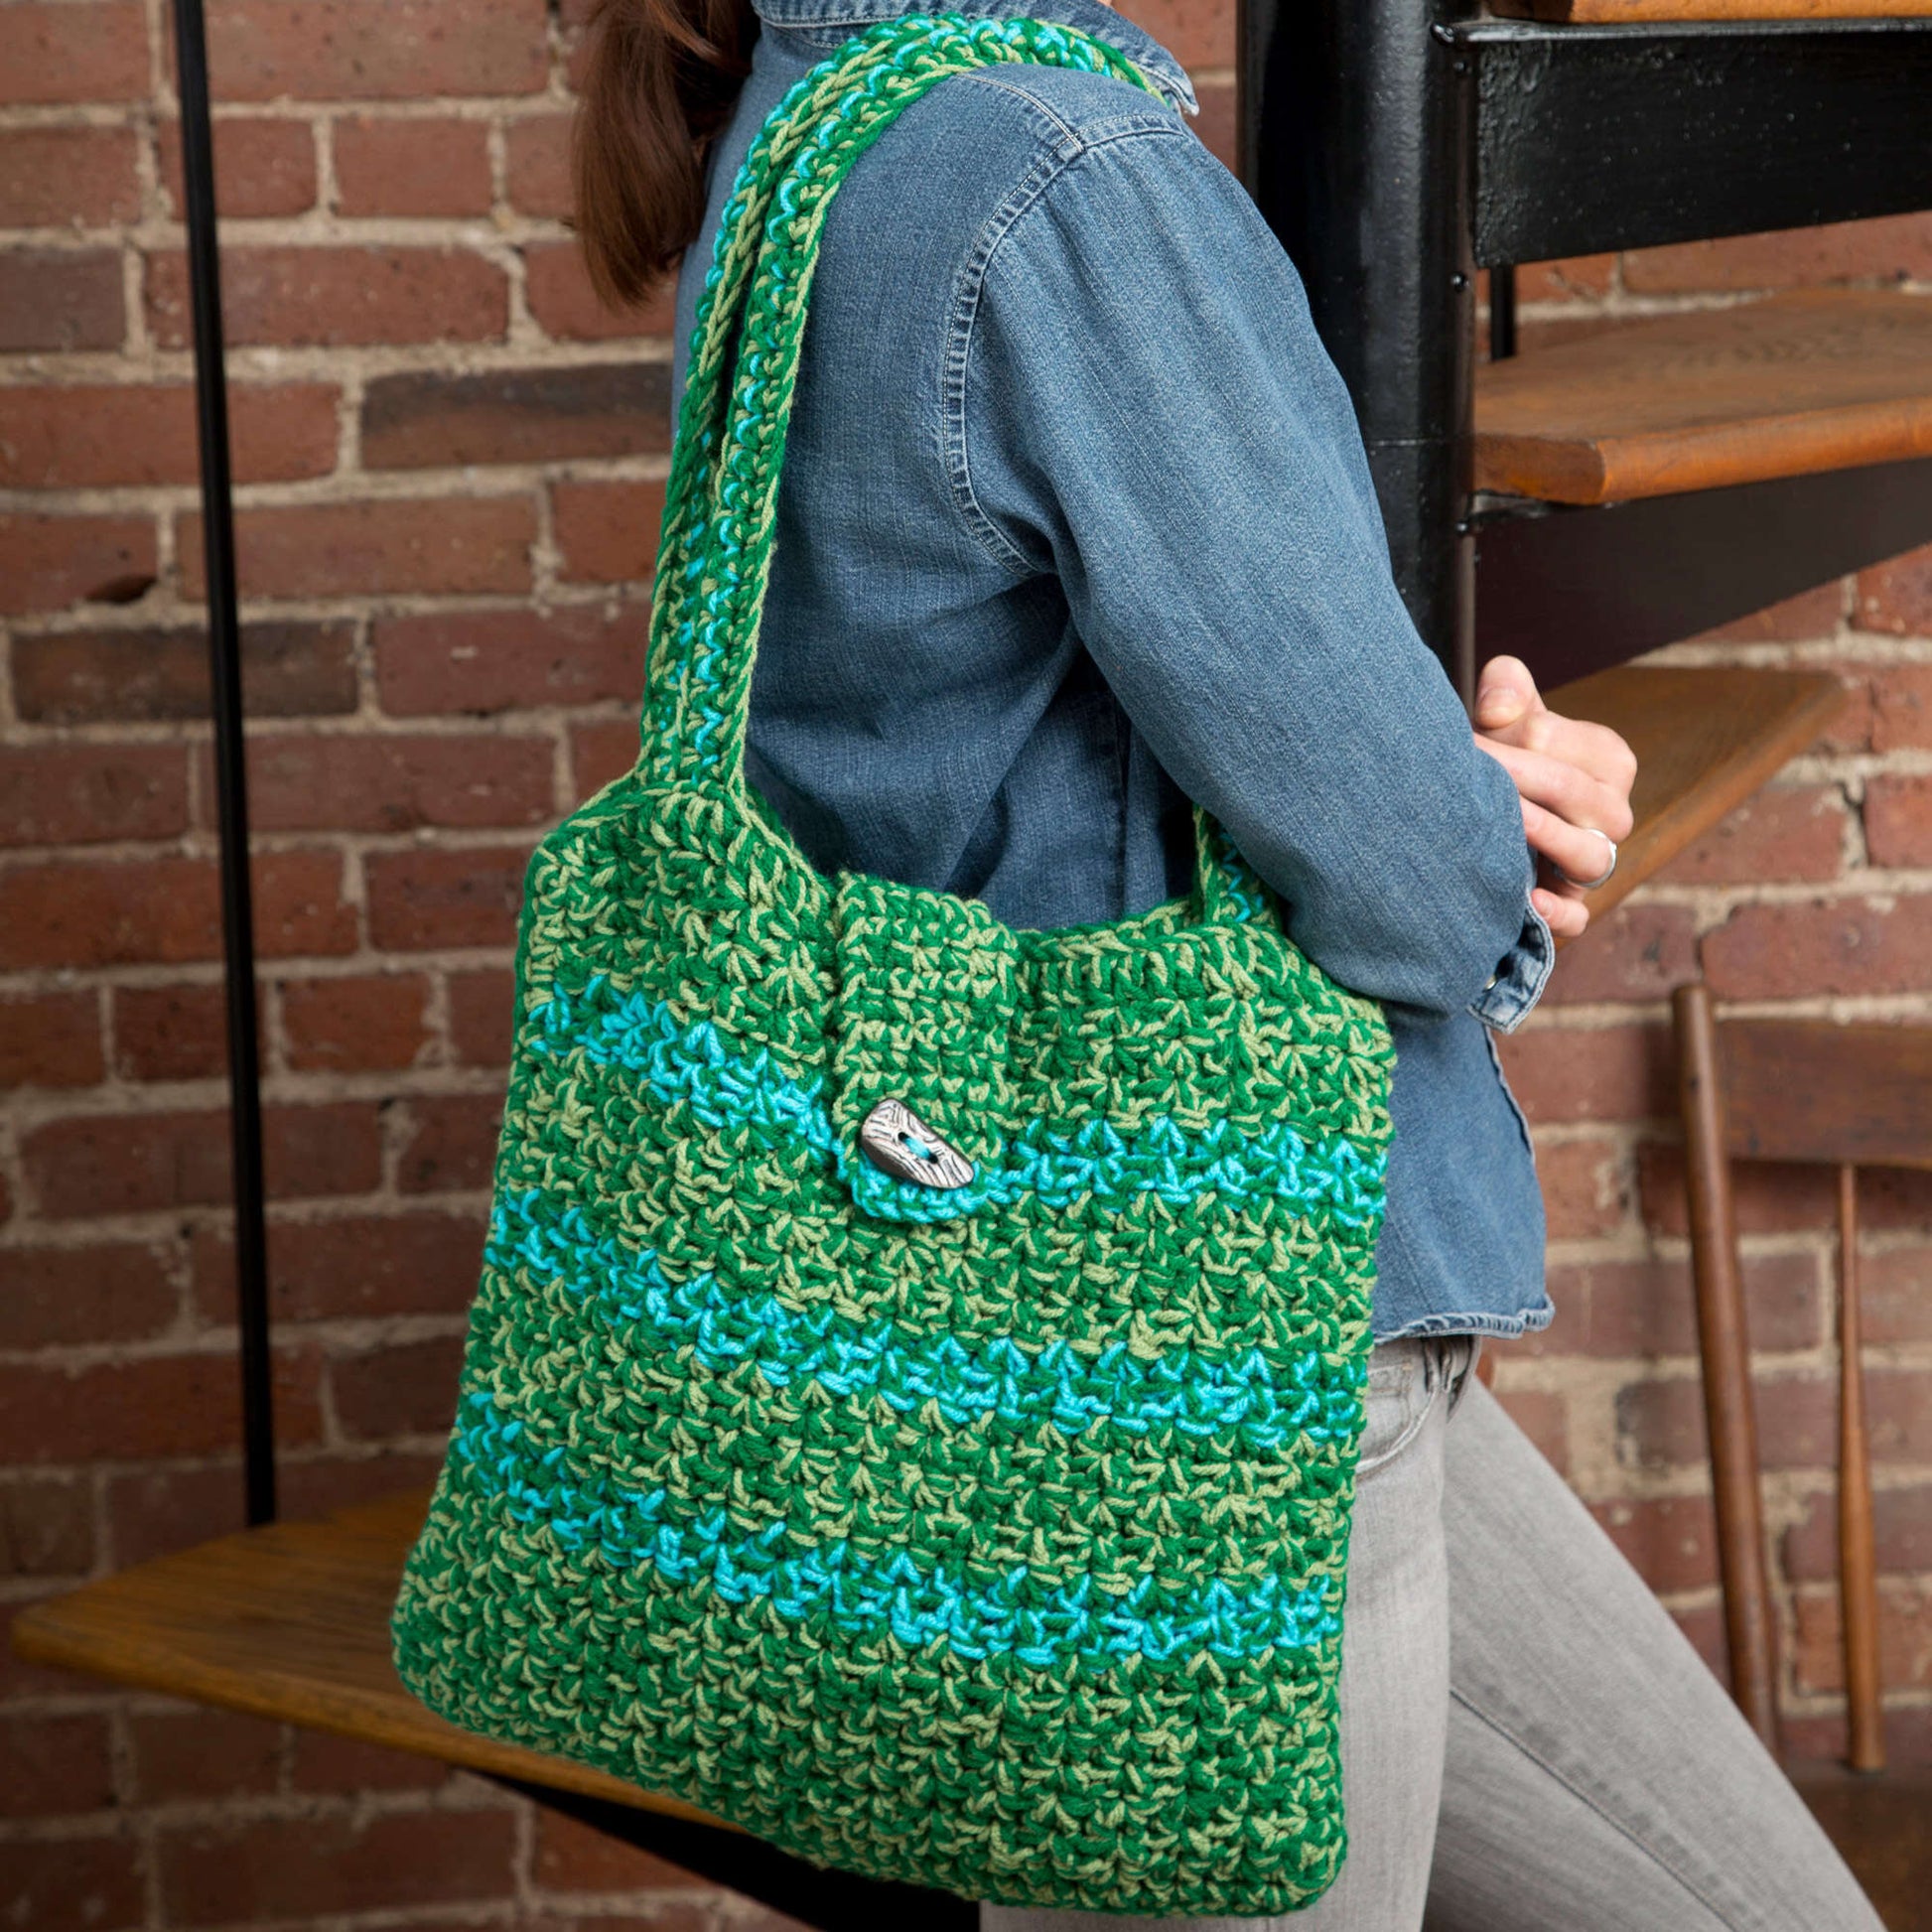 Red Heart Trendy Tote Bag Pattern